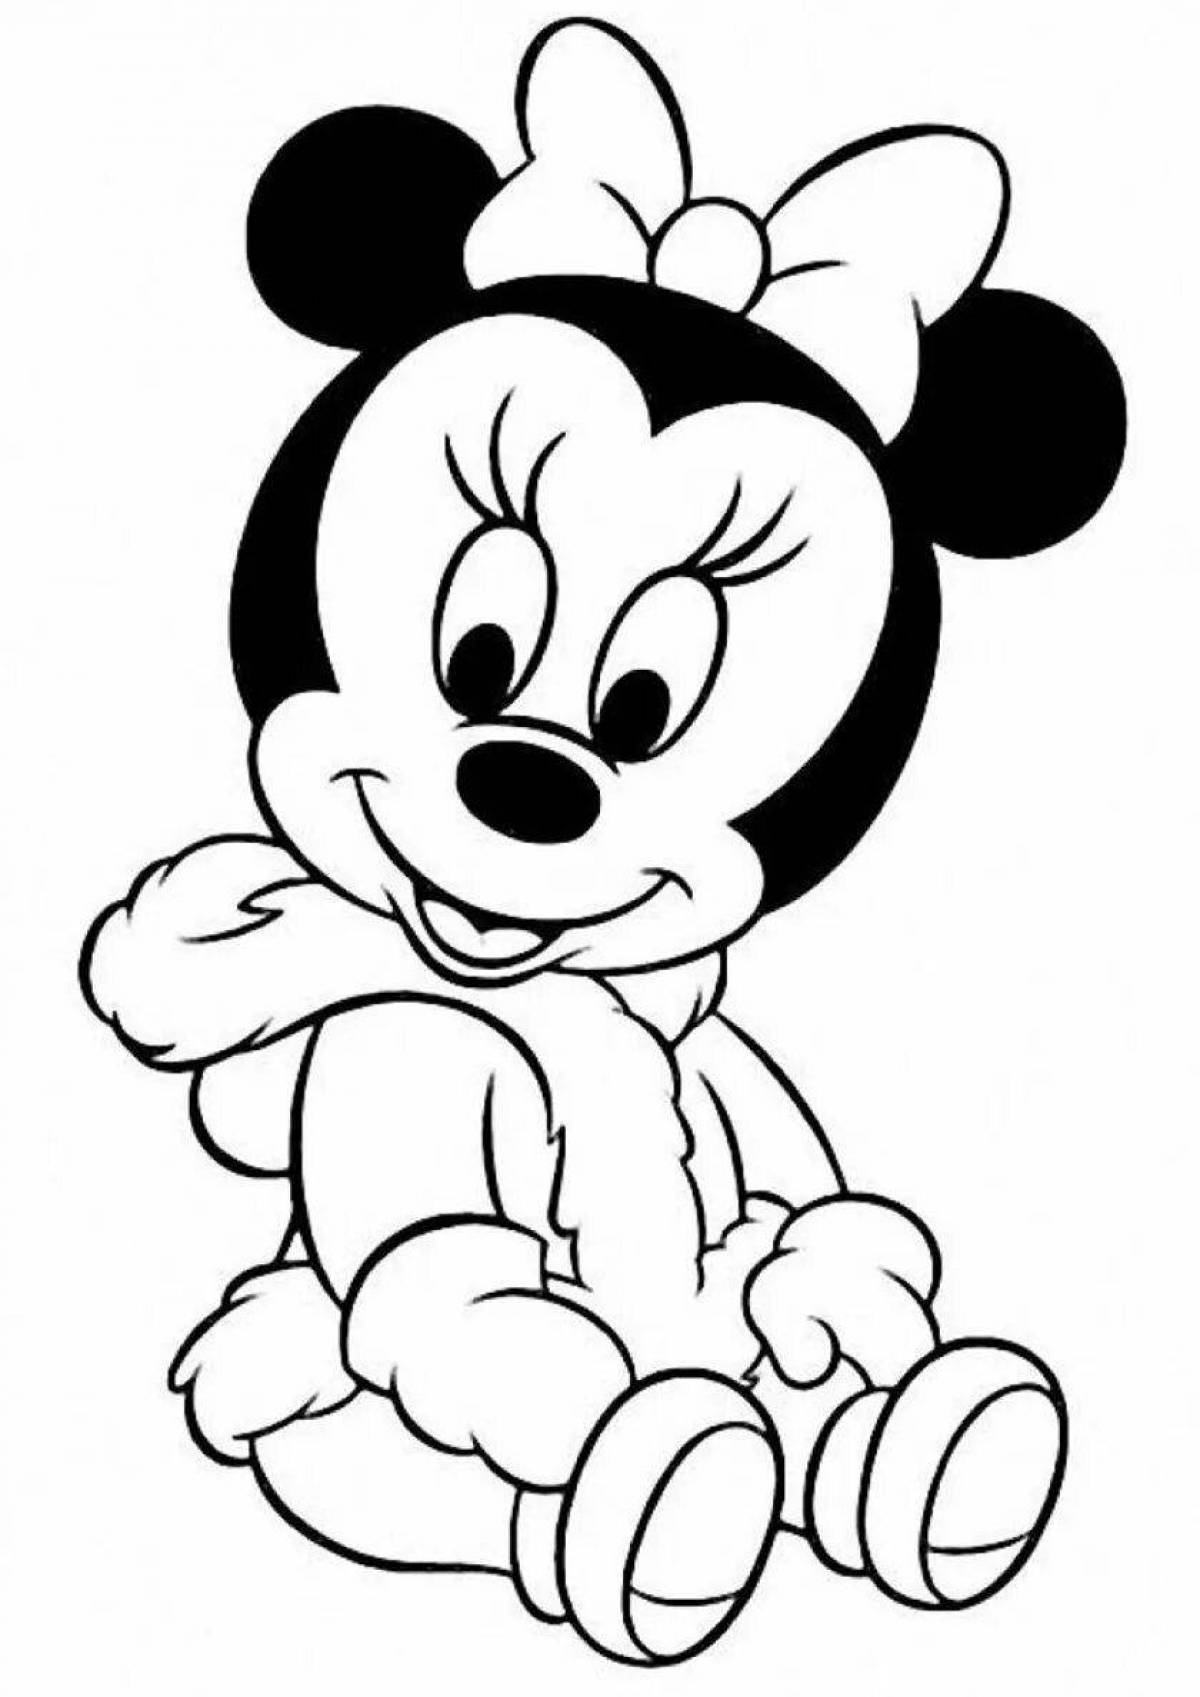 Fun coloring Minnie mouse for kids